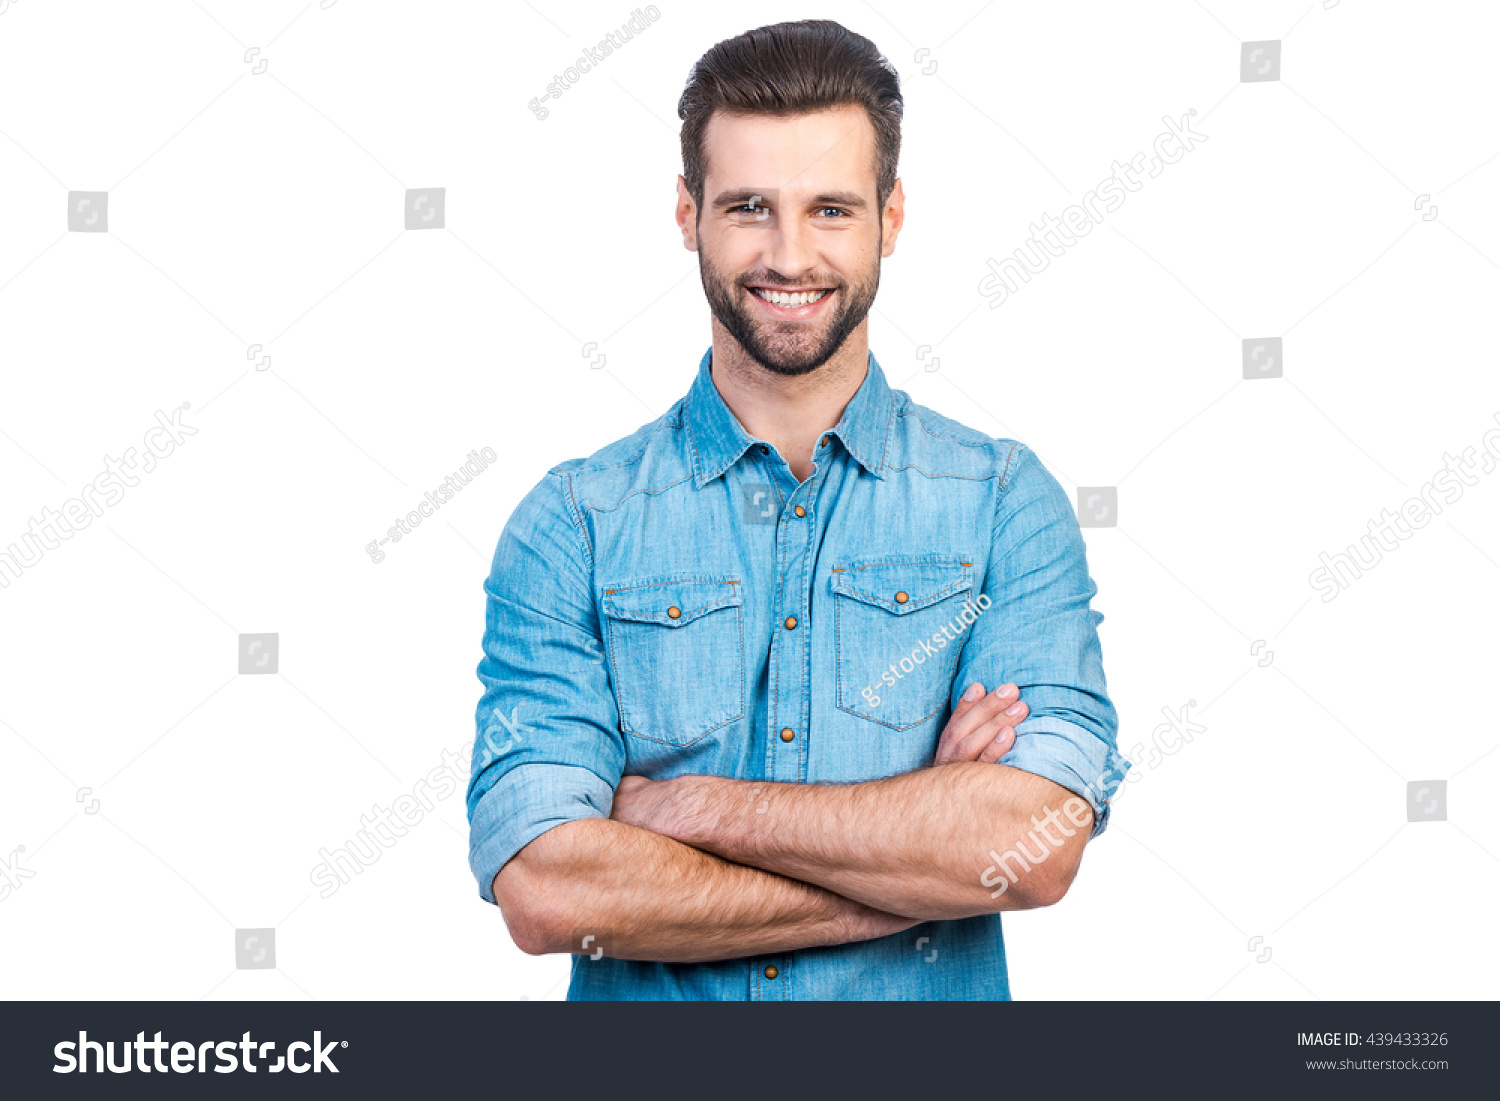 Casually handsome. Confident young handsome man in jeans shirt keeping arms crossed and smiling while standing against white background  #439433326